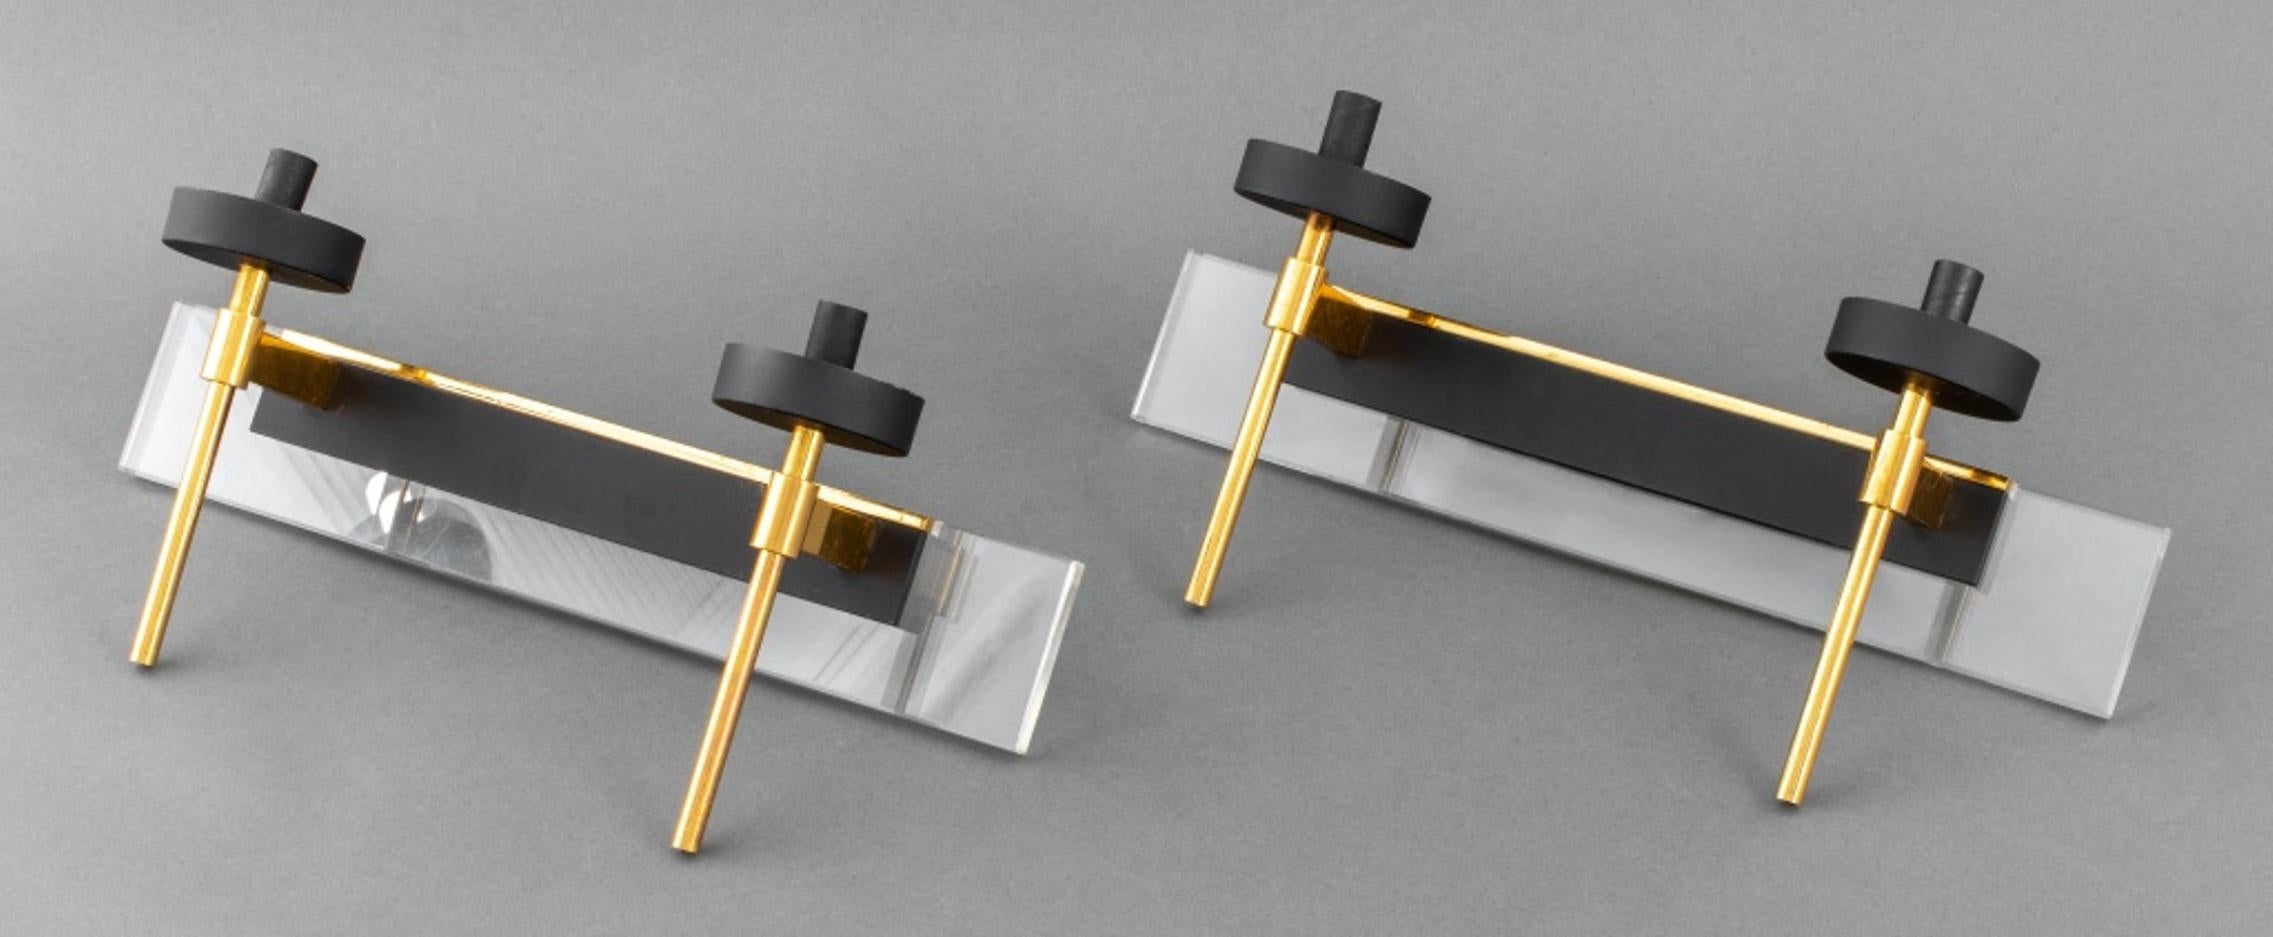 Italian Stilnovo Mid-Century Modern pair of wall sconces with black enameled and brass elements on glass plaque.

Dimensions: 8.5